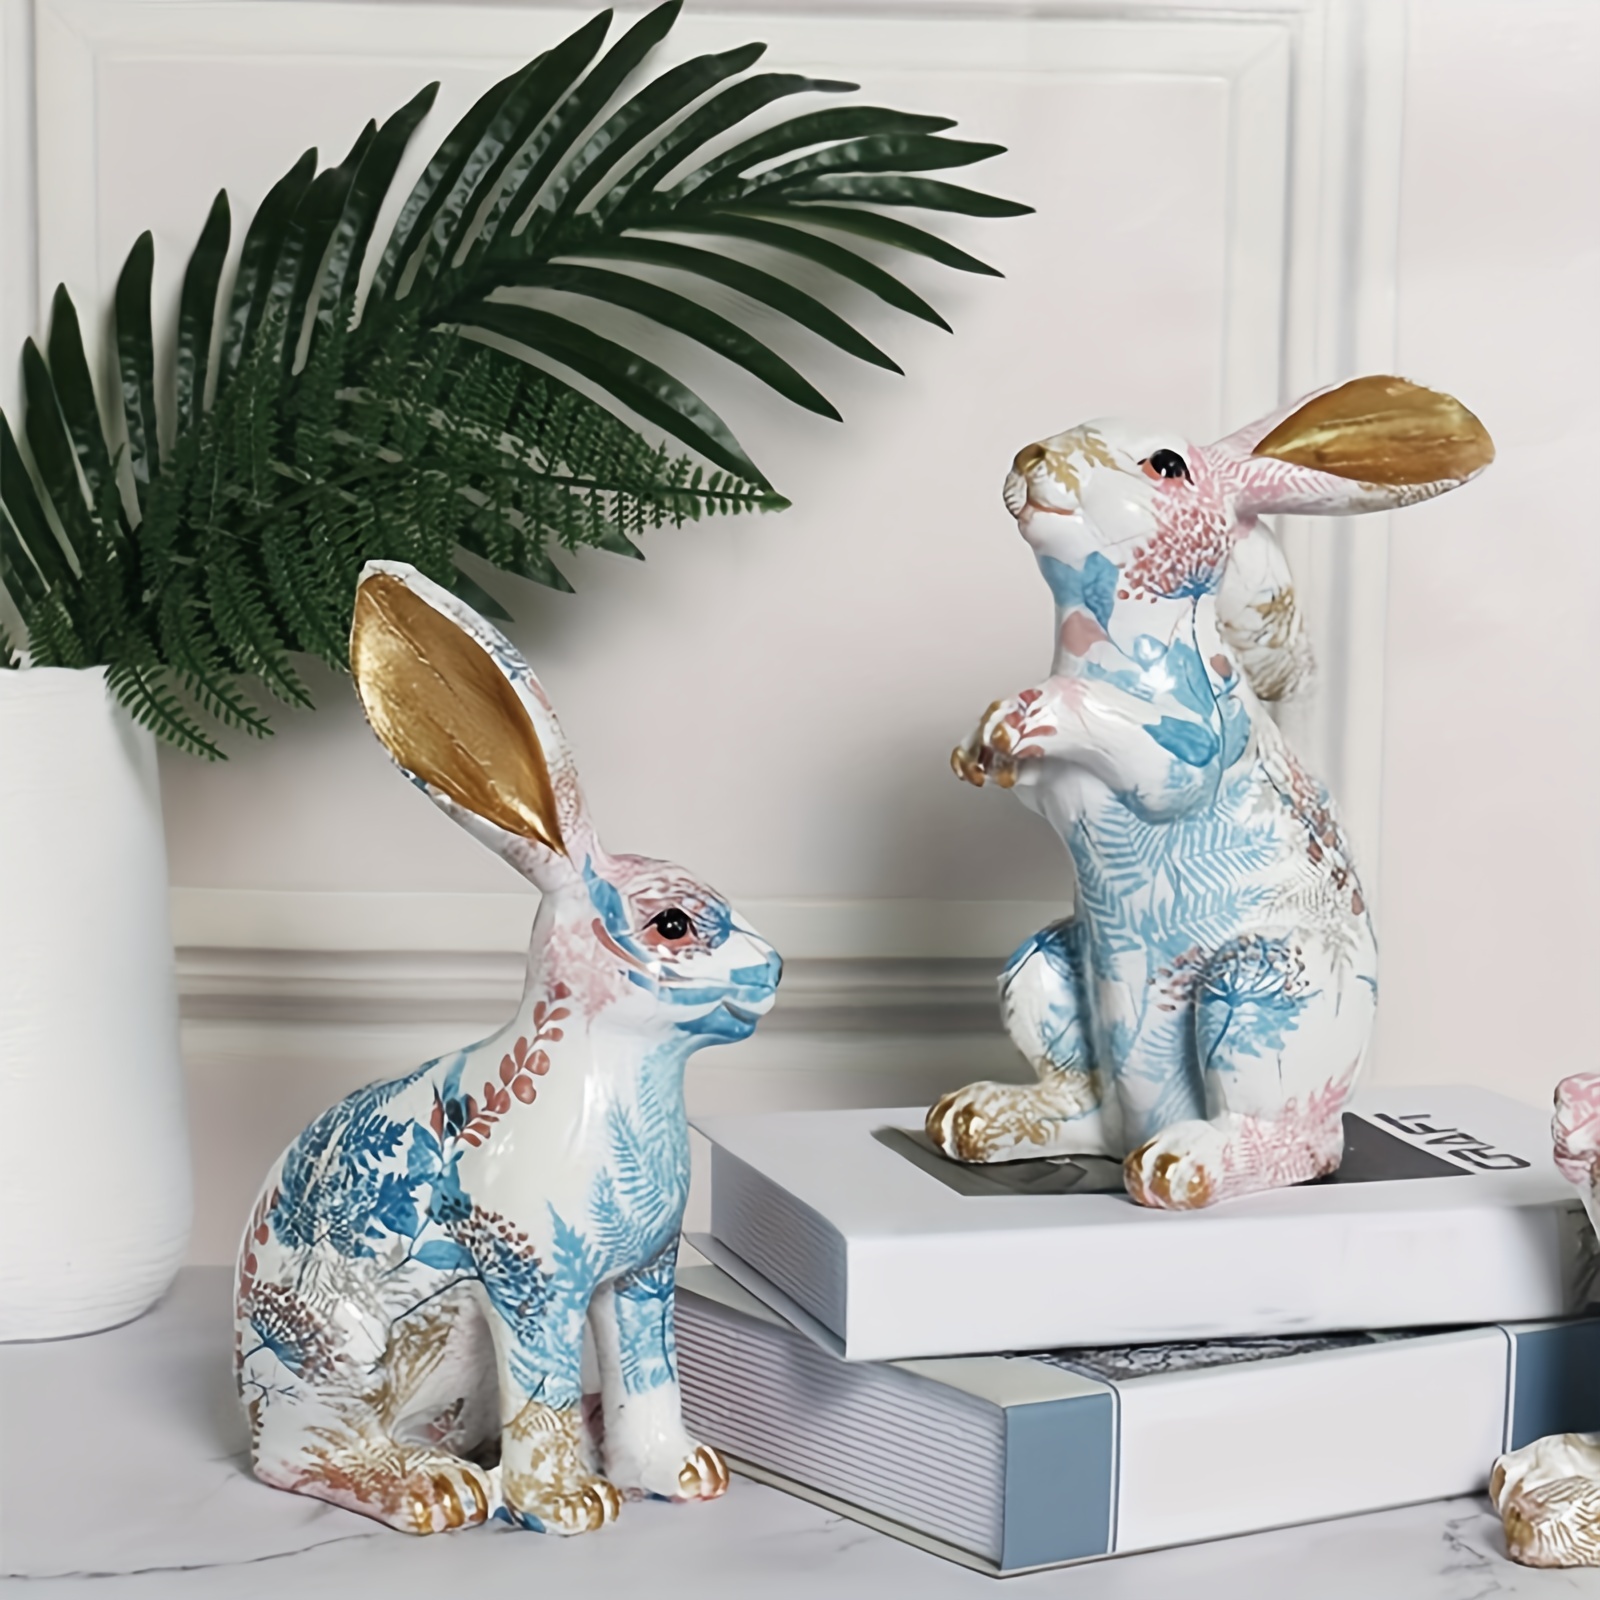 Best Vintage Easter Bunny Figurines 2023 - Where to Buy Porcelain